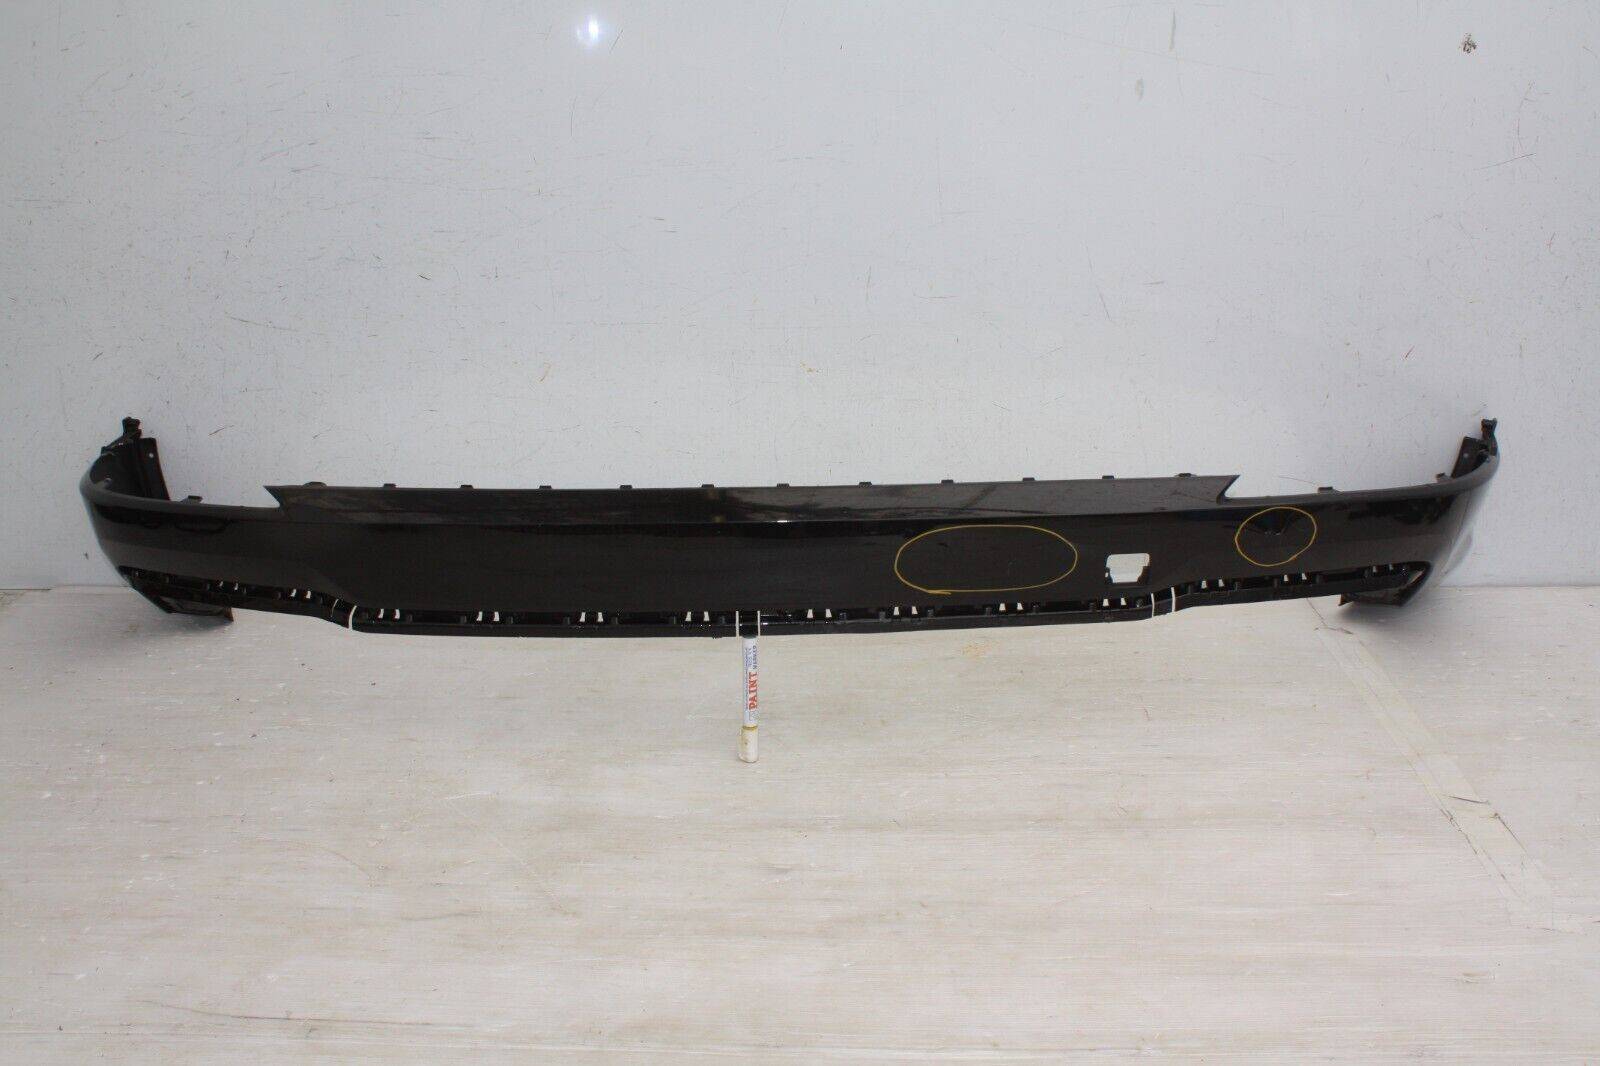 AUDI Q3 Rear Bumper Lower Section 2018 ON 83A807521A Genuine 175755245946